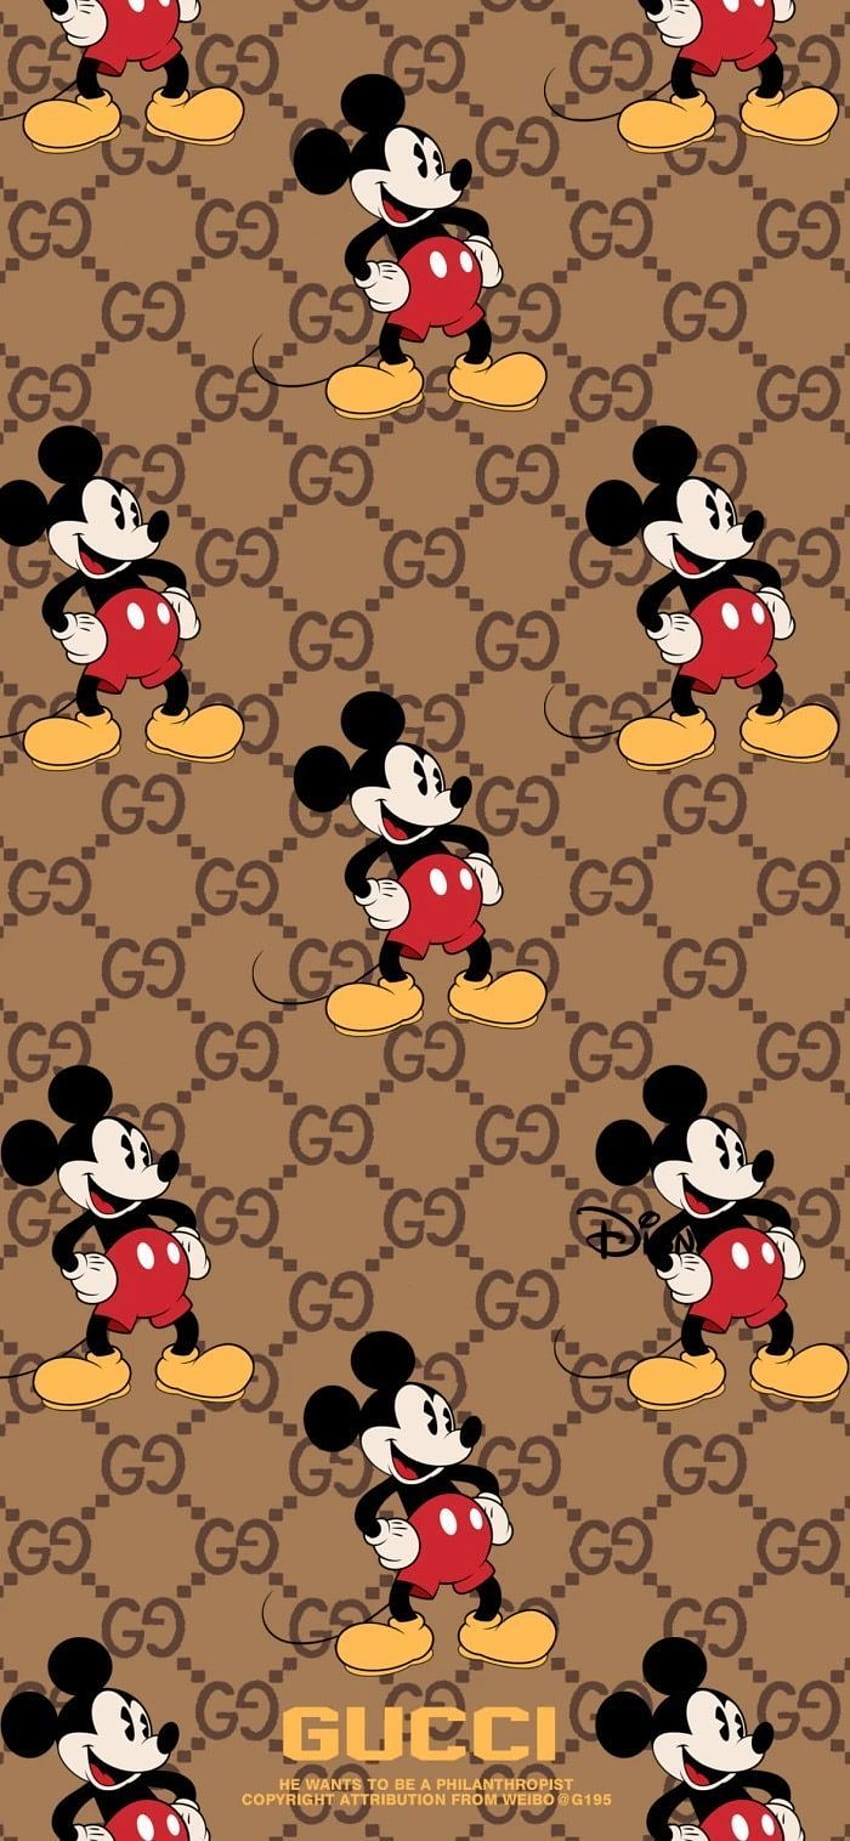 Claribel Torres on Prada, Fendi, Gucci, YSL & LV in 2021. Mickey mouse  iphone, Minnie mouse , Disney silhouette, Mickey and Minnie Logo HD  wallpaper